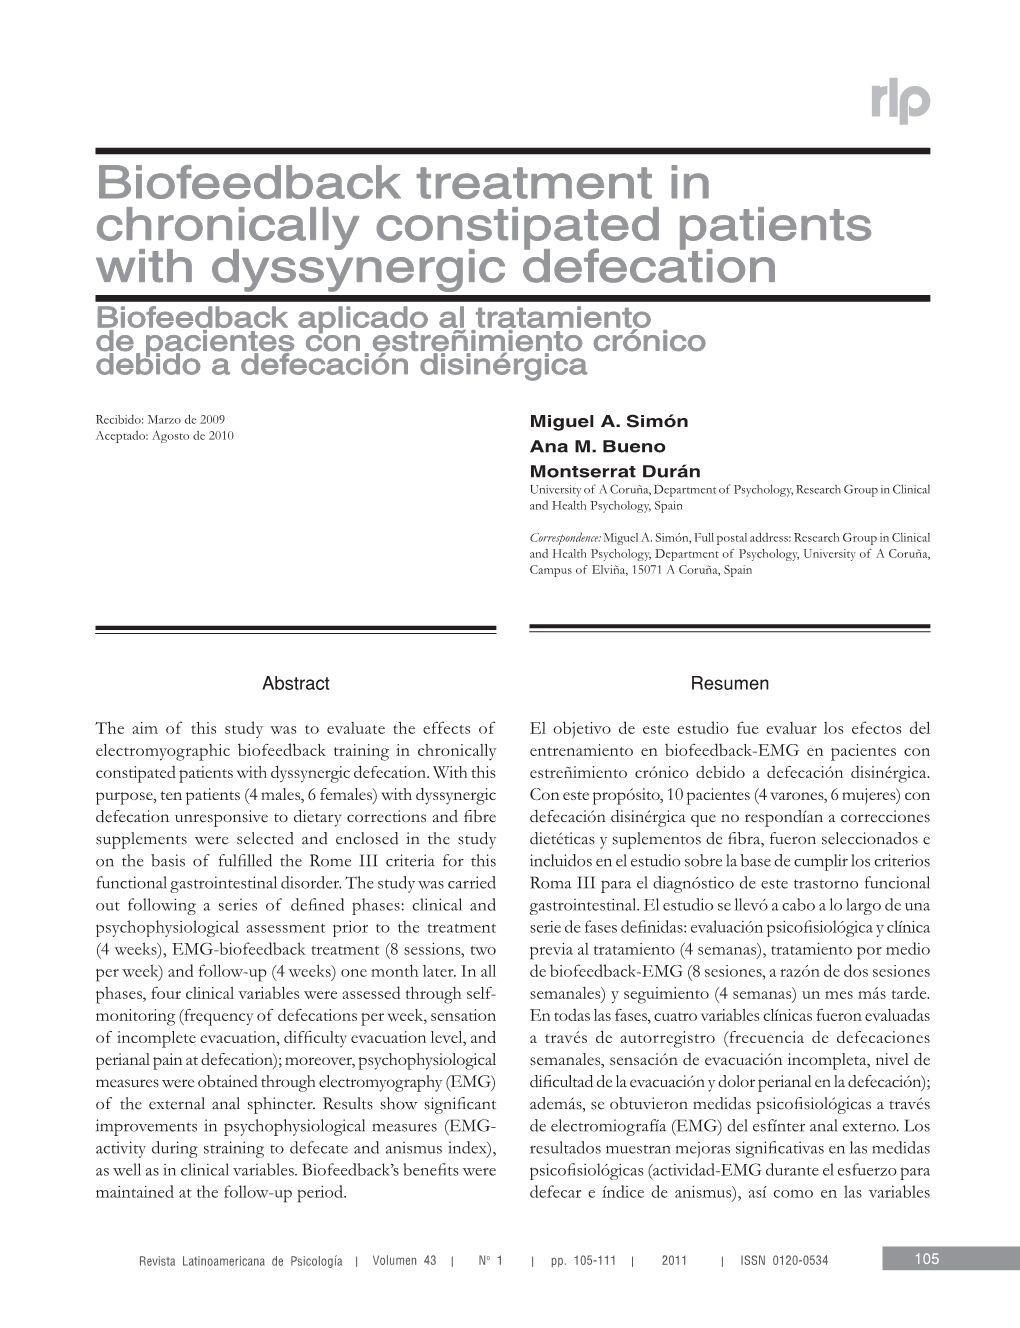 Biofeedback Treatment in Chronically Constipated Patients With